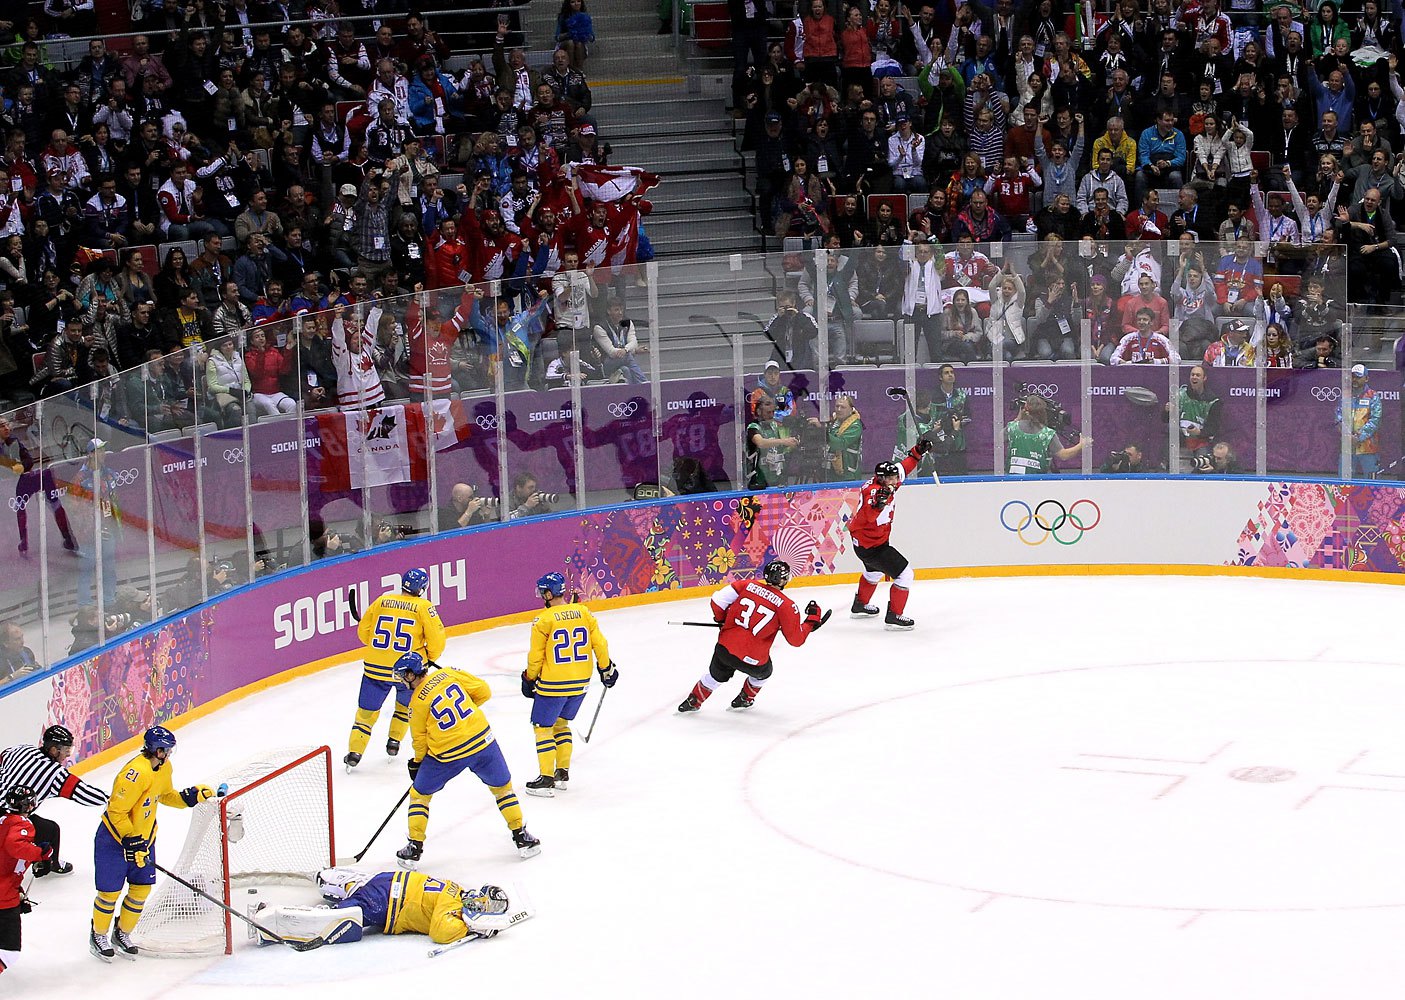 Sidney Crosby #87 of Canada celebrates with teammate Patrice Bergeron #37 after scoring a second-period goal against Henrik Lundqvist #30 of Sweden.